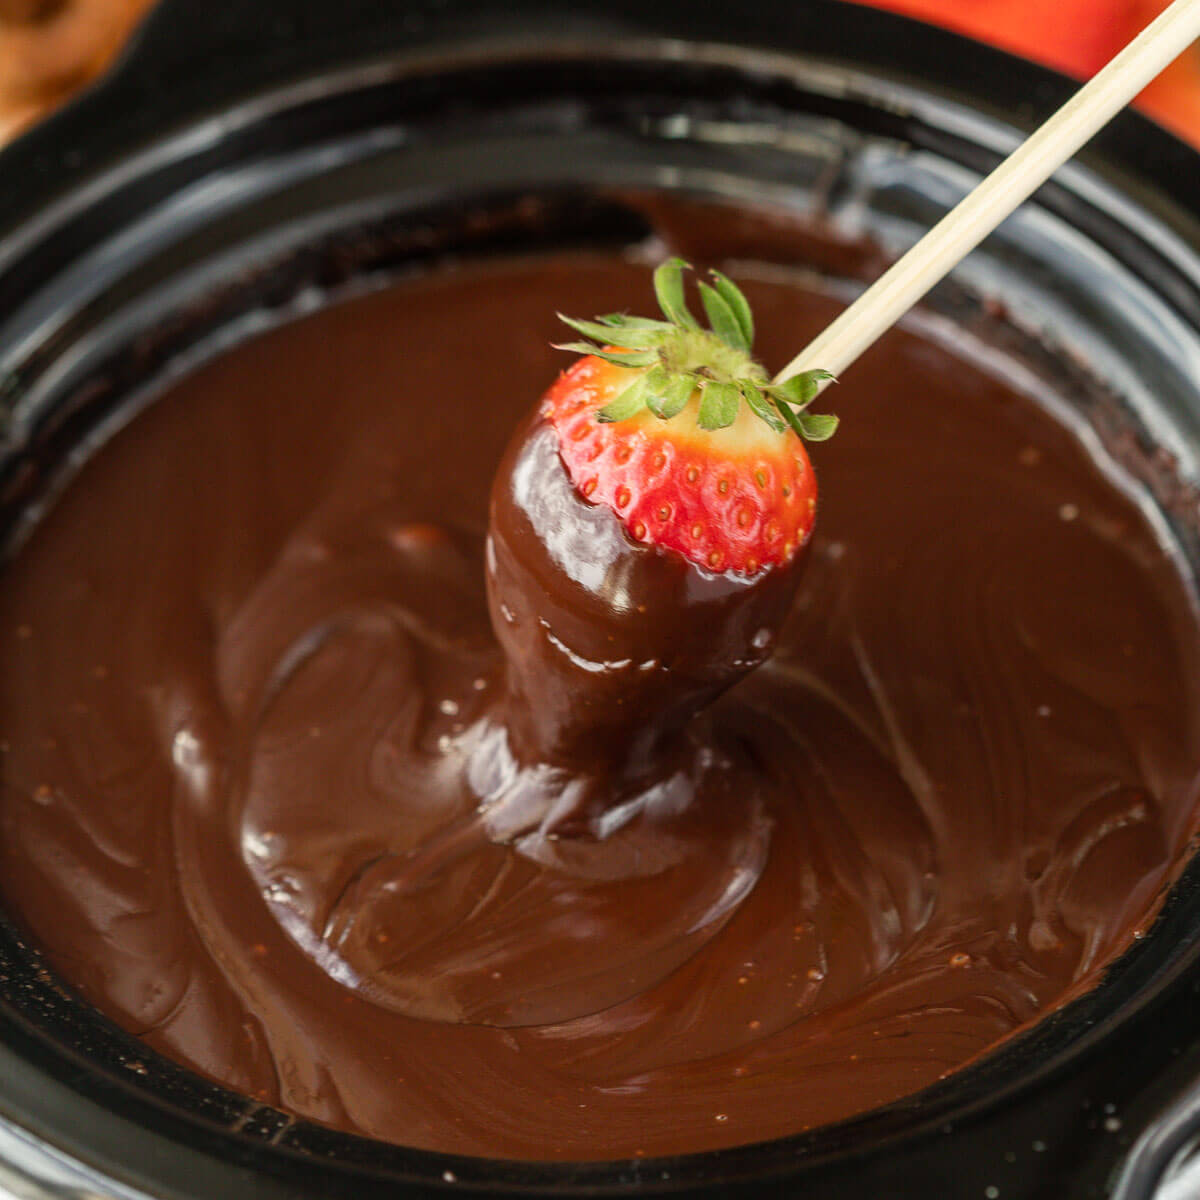 Melted chocolate in the crock pot and a strawberry being dipped into it